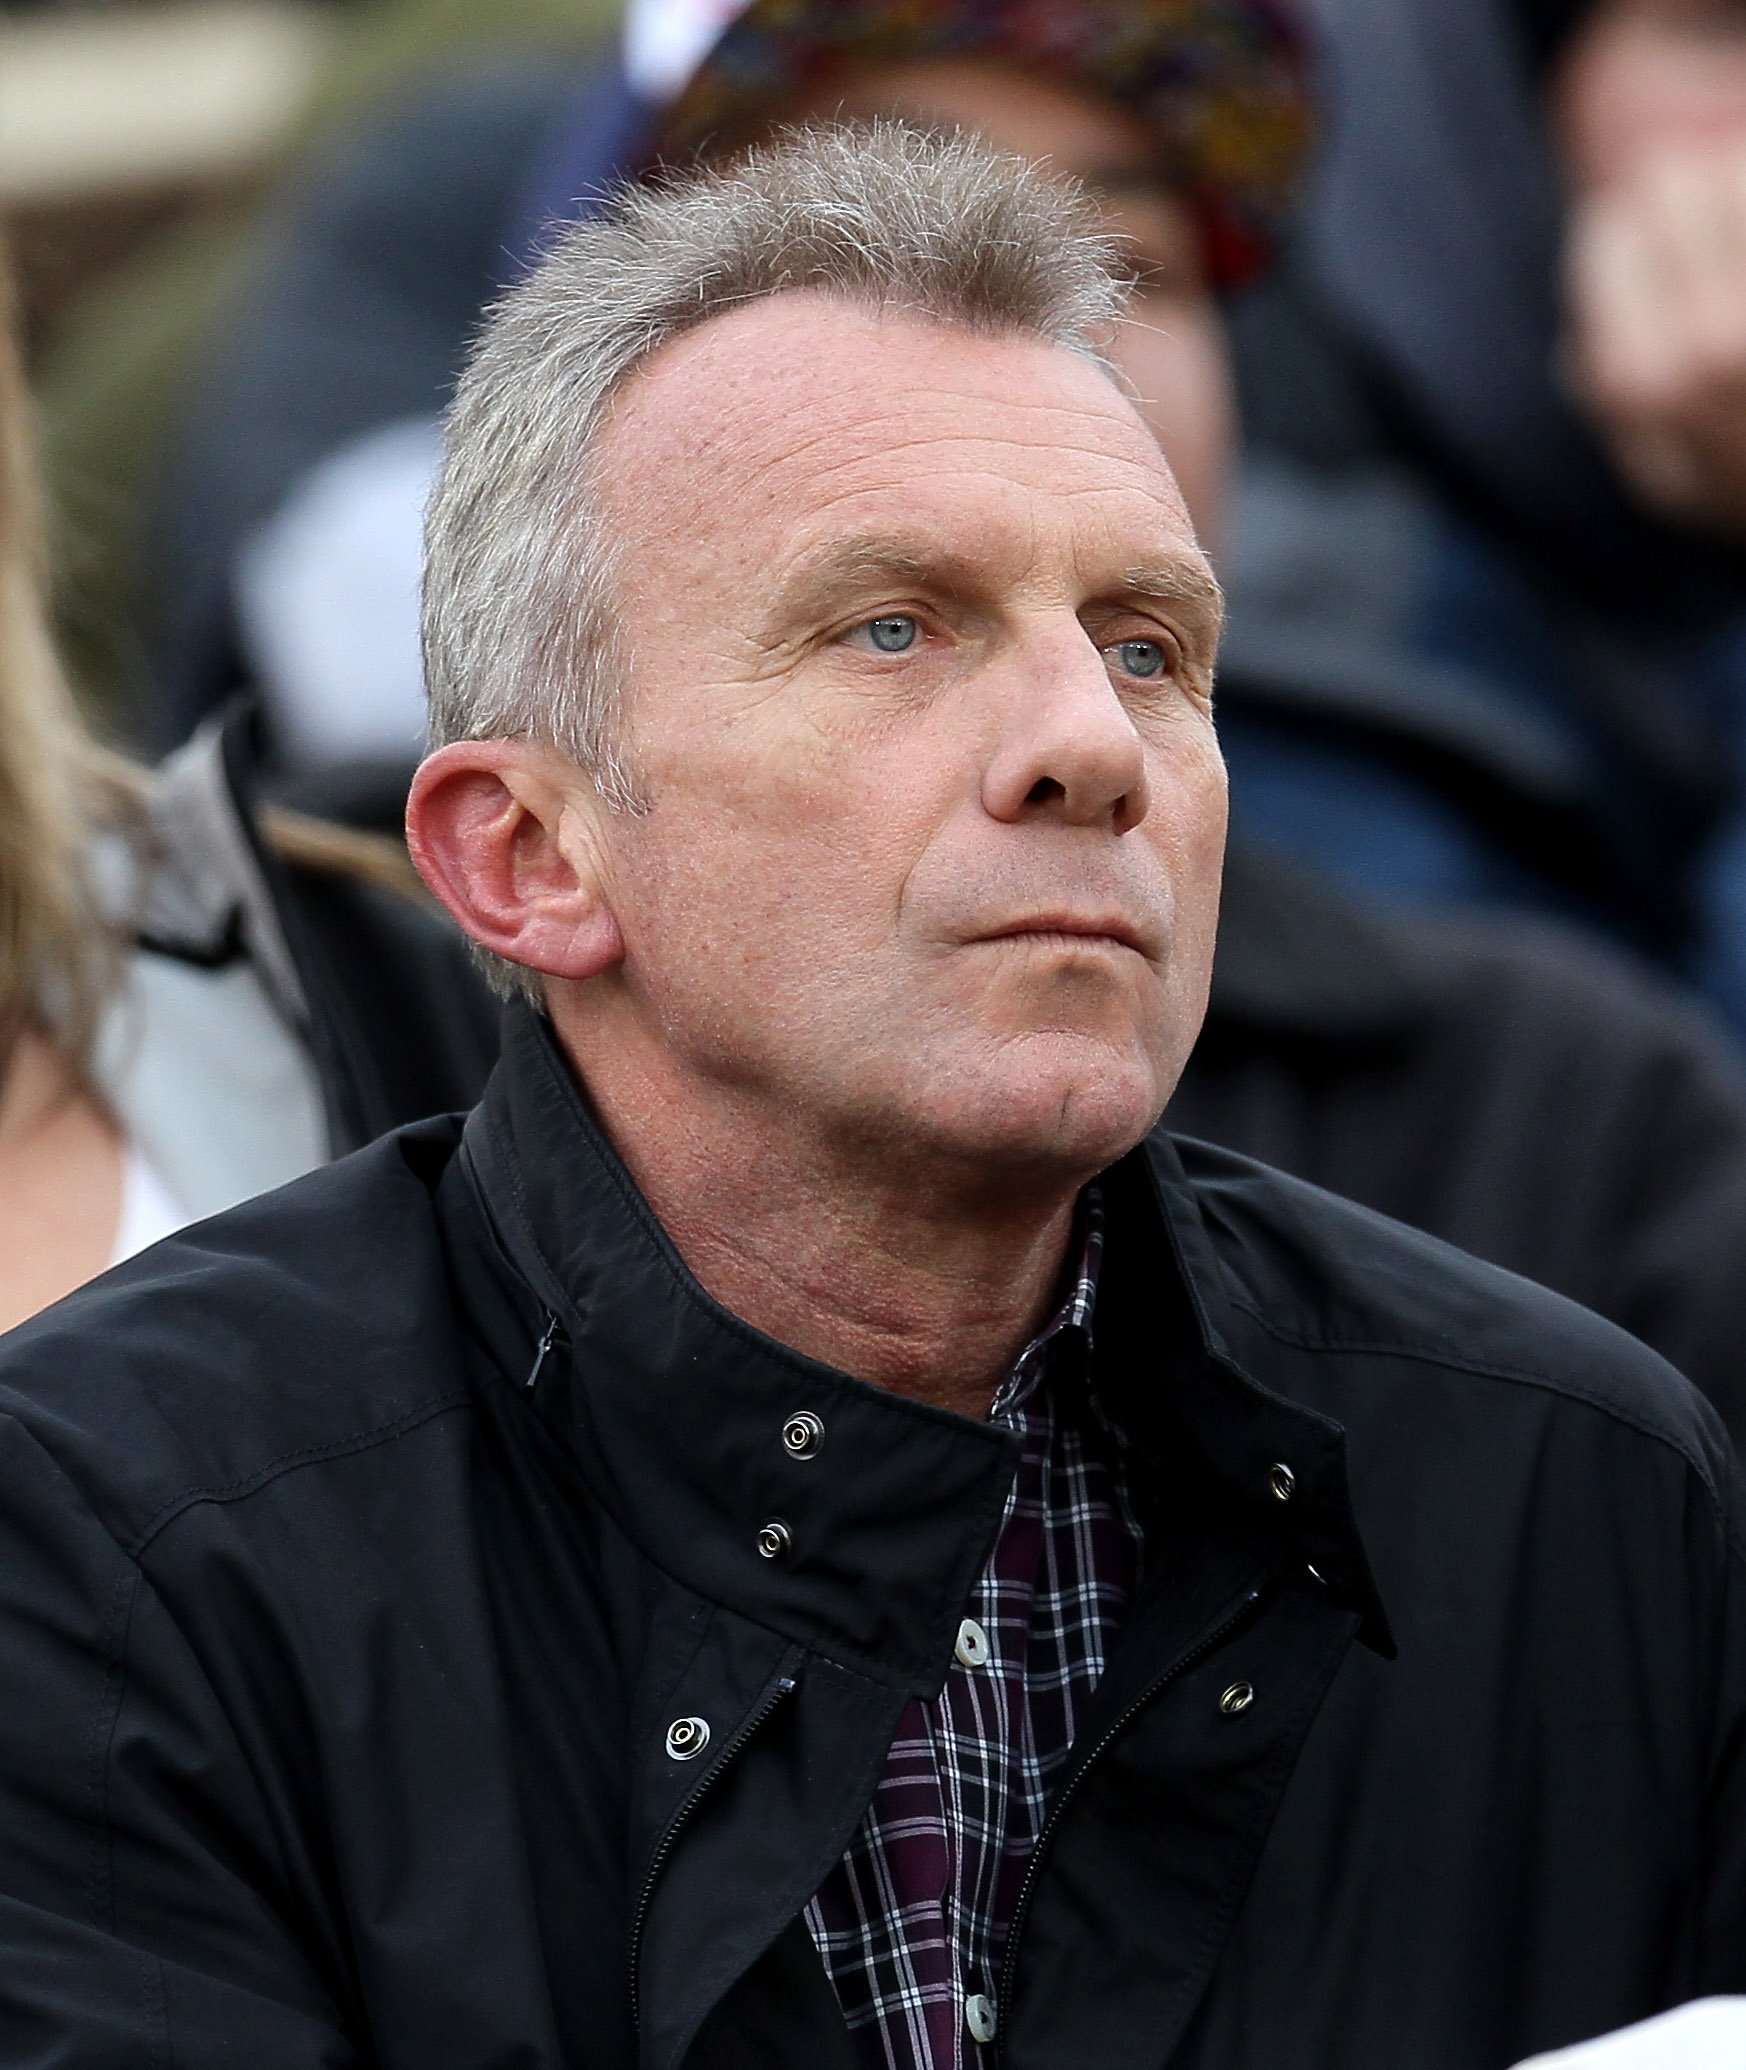 Joe Montana watching a game between the Washington Huskies and the USC Trojans at the Los Angeles Memorial Coliseum on November in Los Angeles, California | Photo: Stephen Dunn/Getty Images